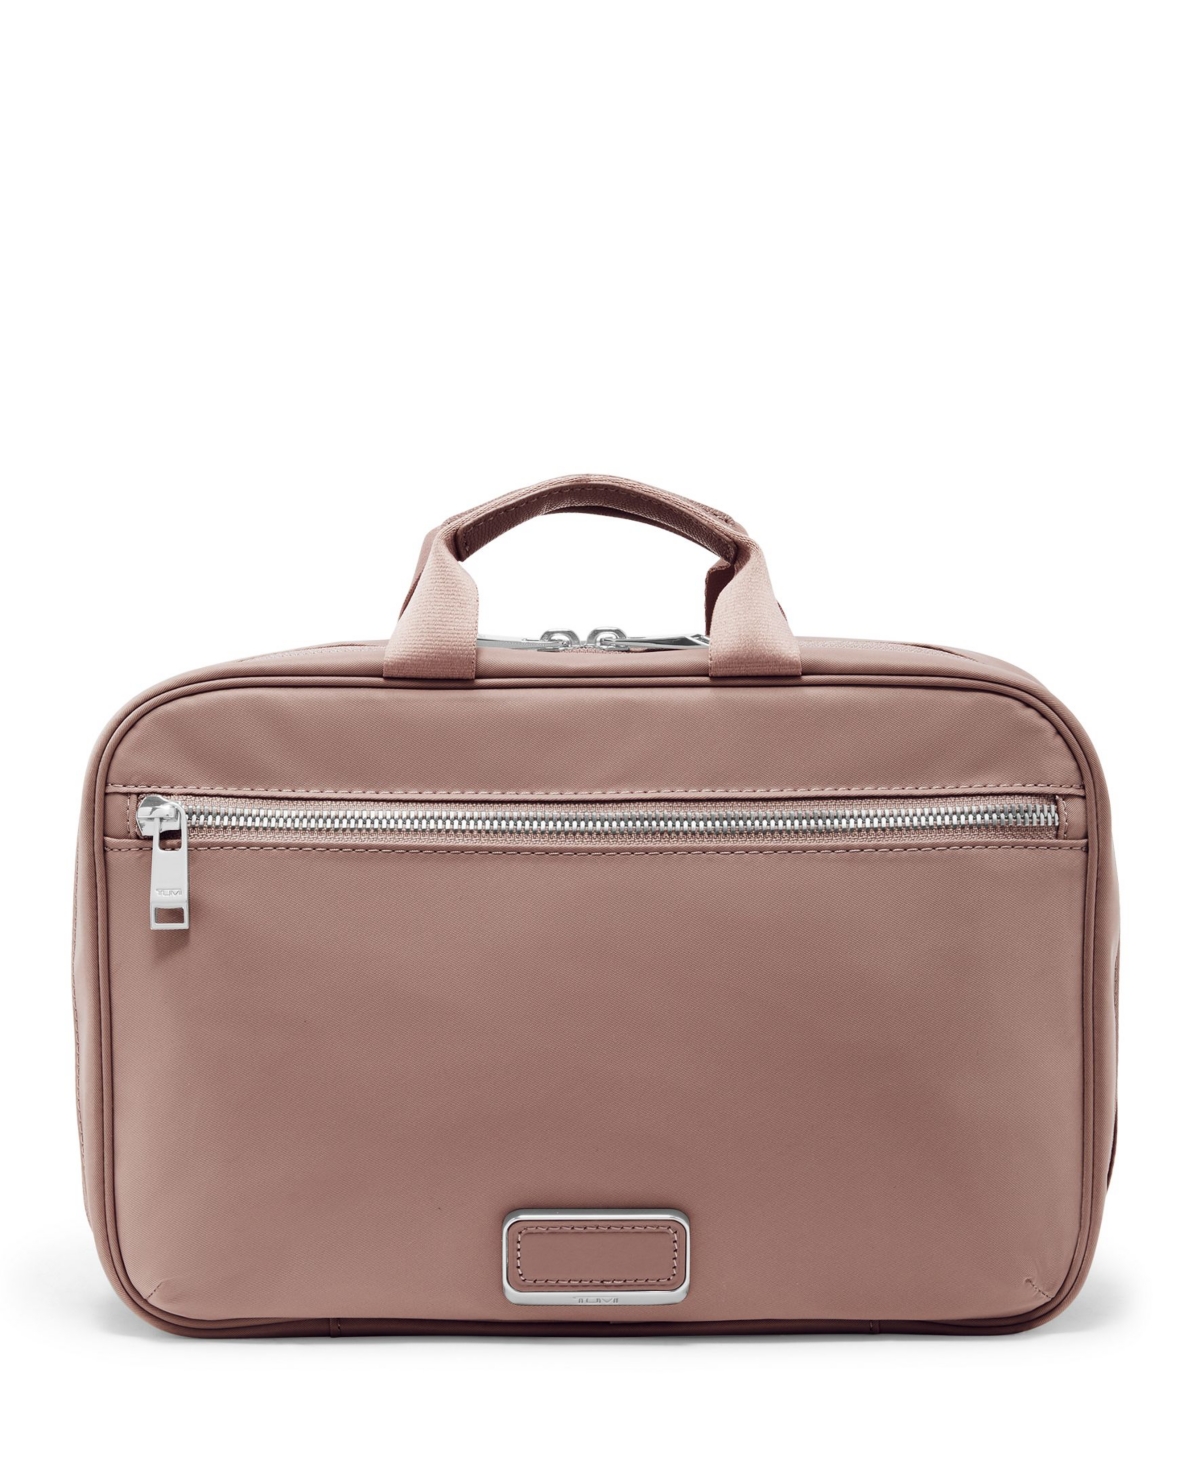 Tumi Voyageur Madeline Cosmetic Case In Light Mauve